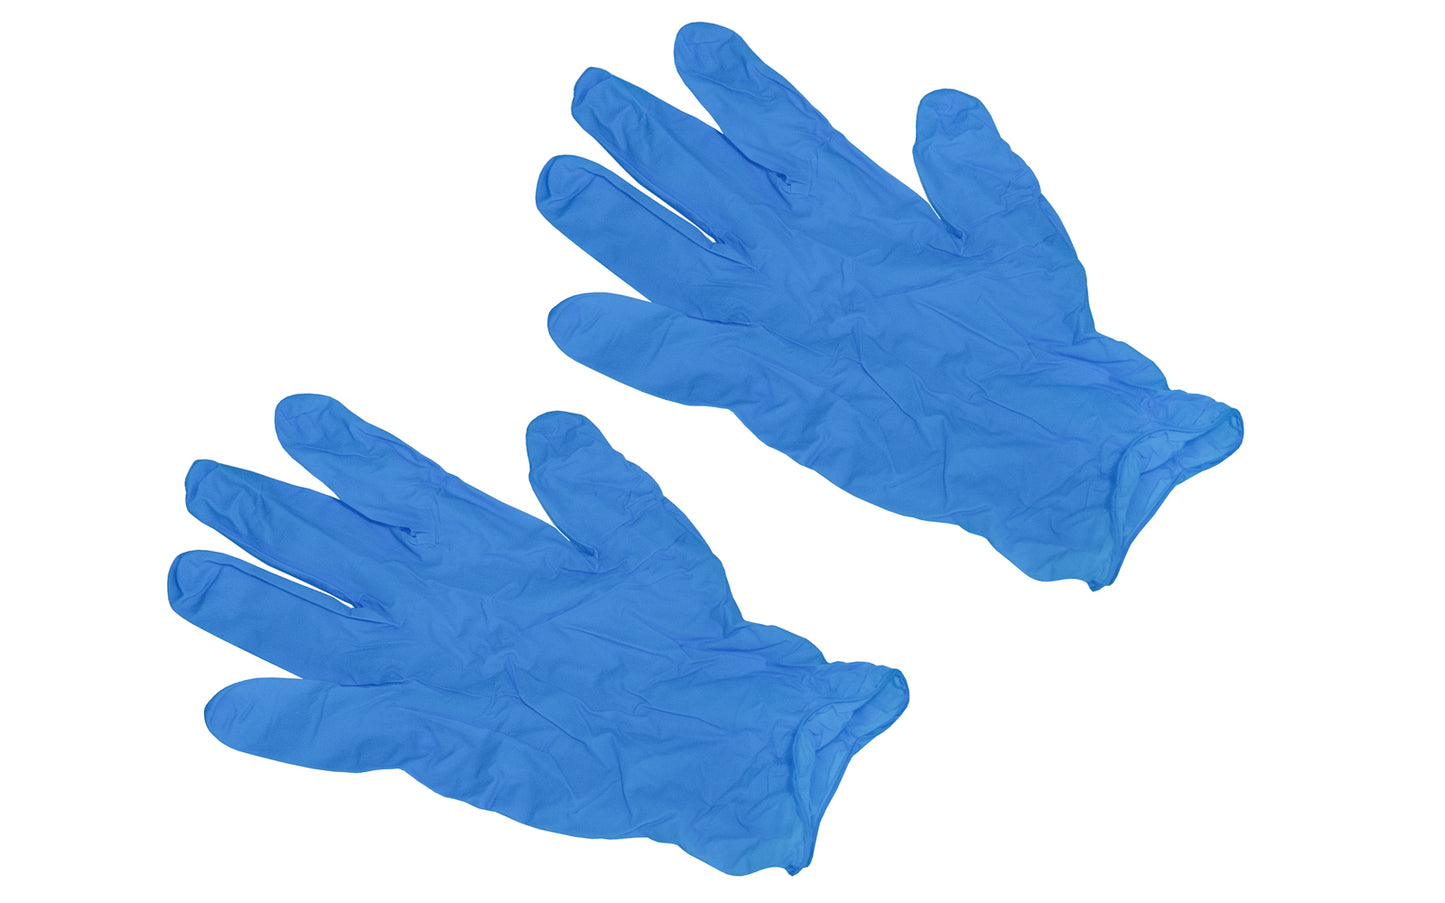 Powder-free Nitrile gloves are good disposable gloves for a variety of uses including home improvement, shop use, food preparation, painting, cleaning, postal work, security, pet care, hobby work, arts & crafts. Beaded cuff style. Ambidextrous design fits right or left hand, 4 Mil, Powder free nitrile 100 gloves in box